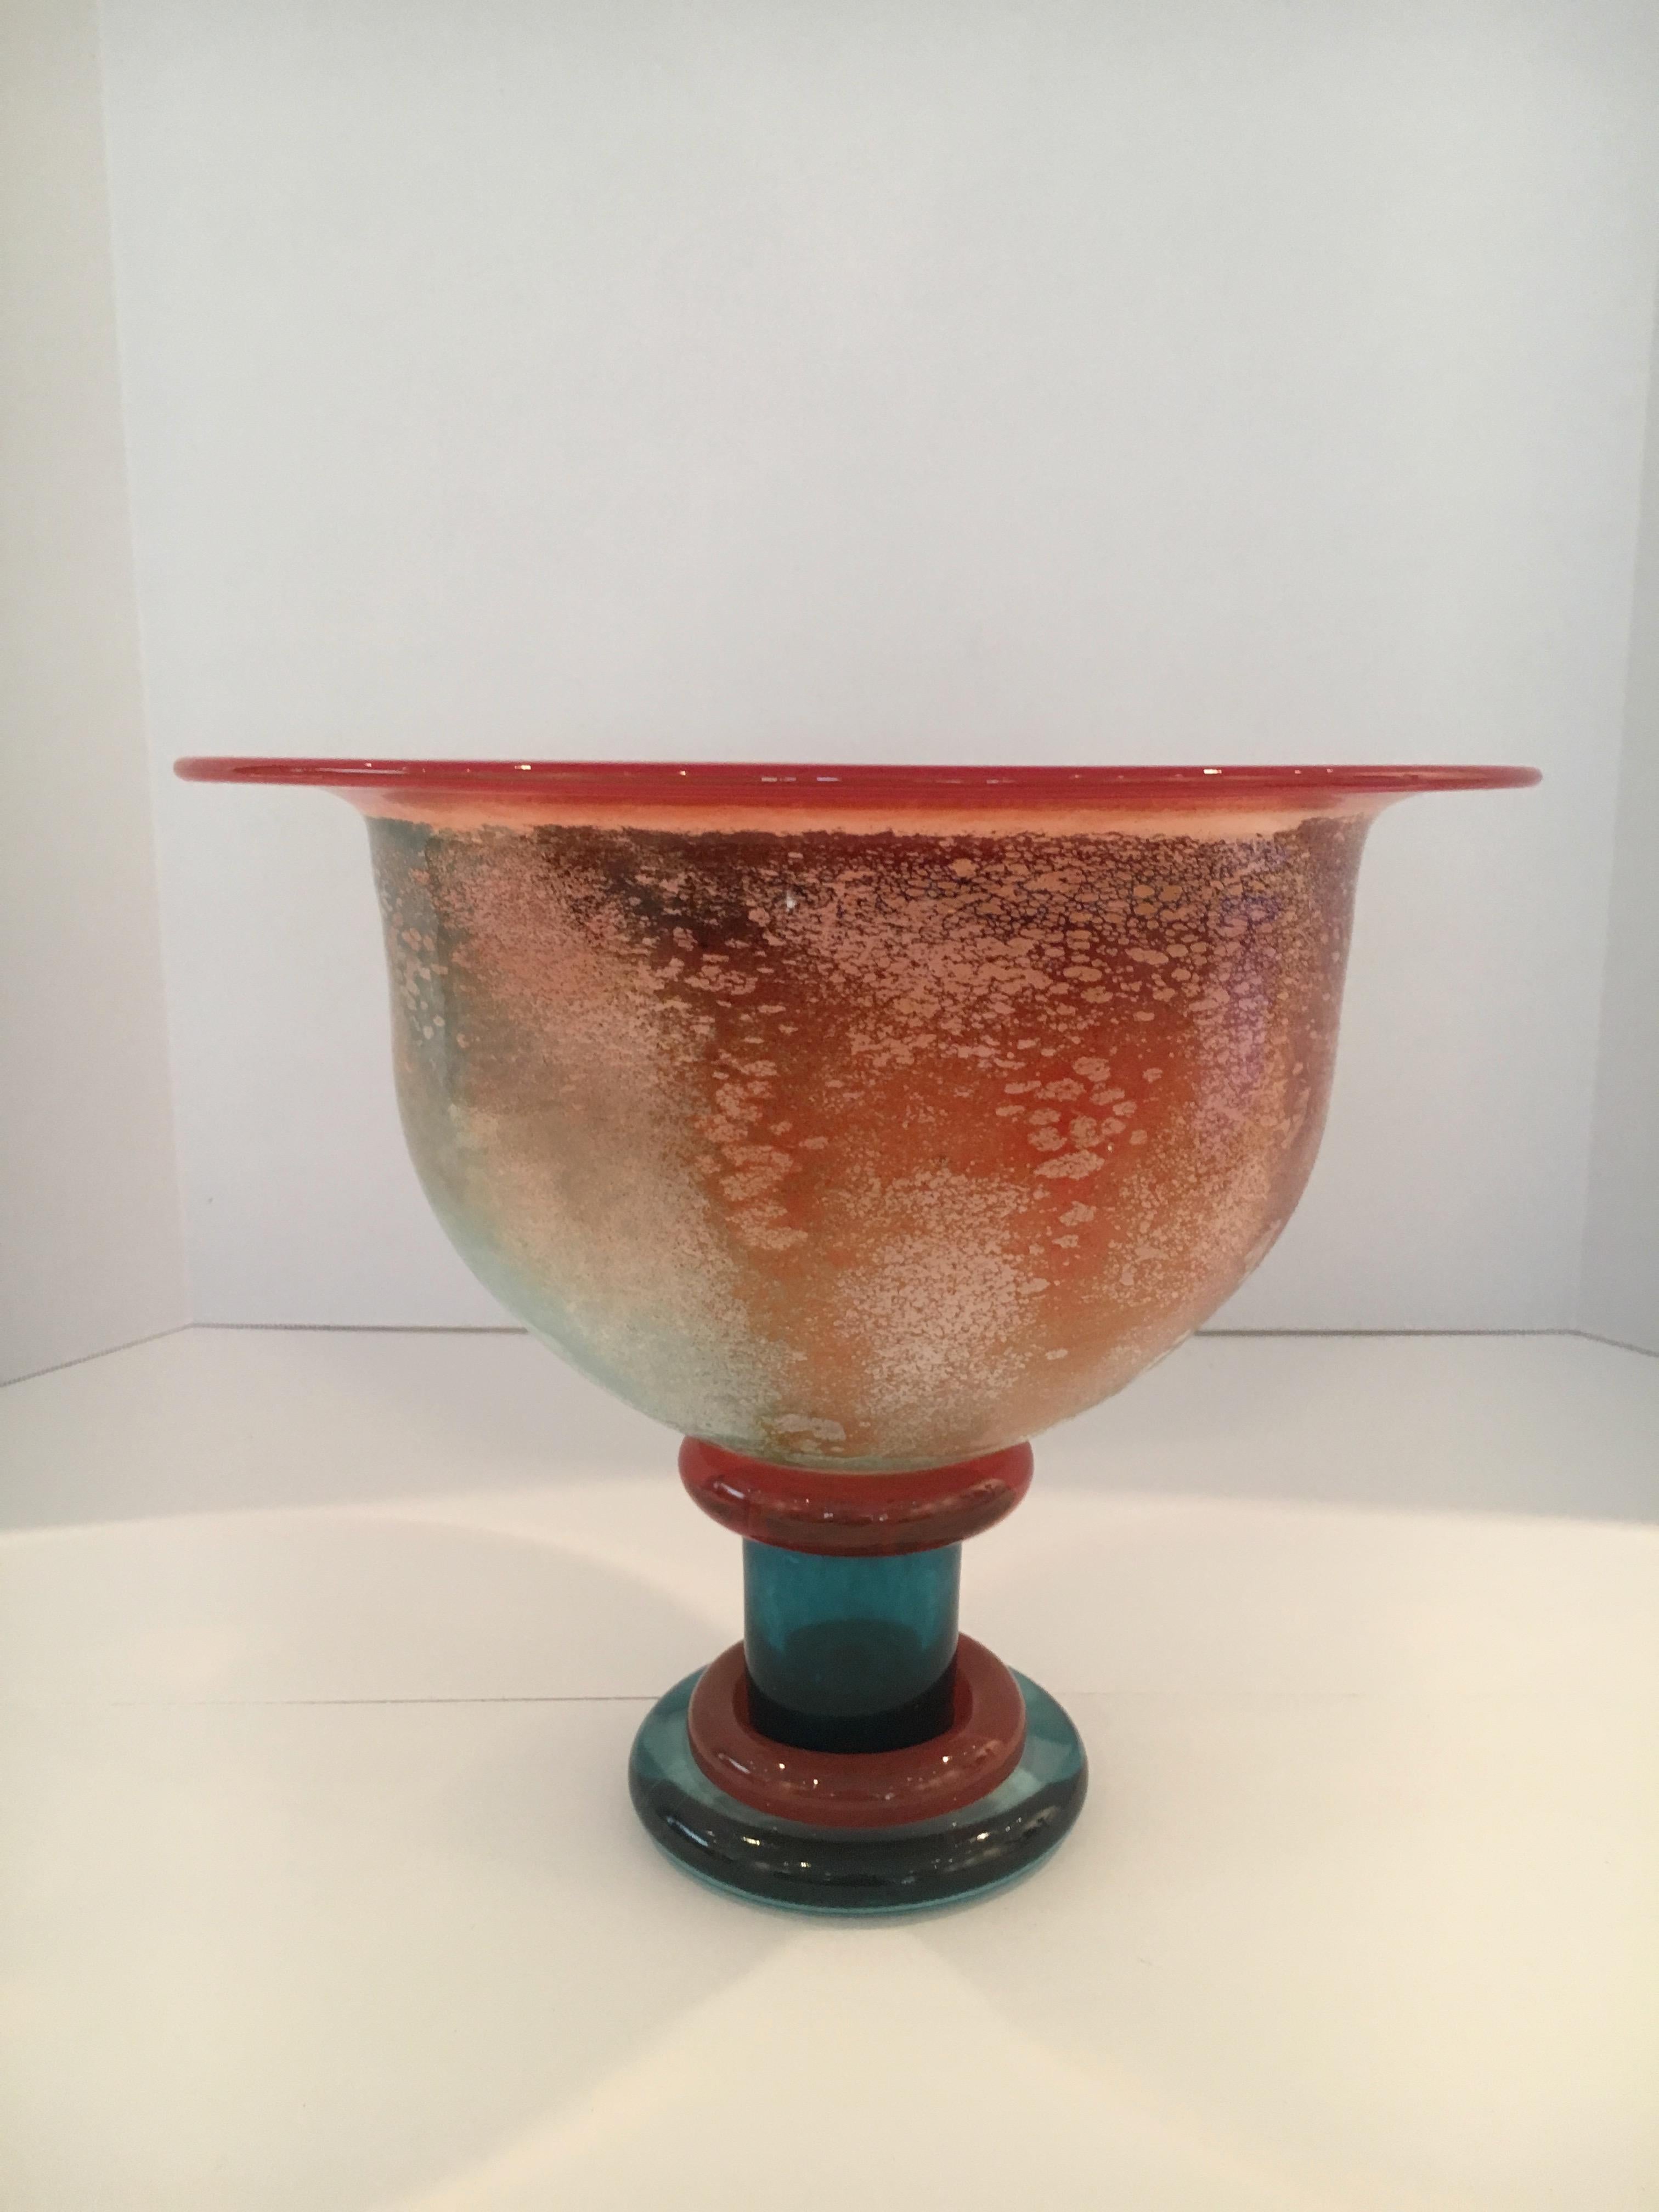 Kosta Boda footed can bowl by Kjell Engman. Remarkable art glass bowl works well as an art or decorative piece. Also a compliment with flowers or your favorite fruit!